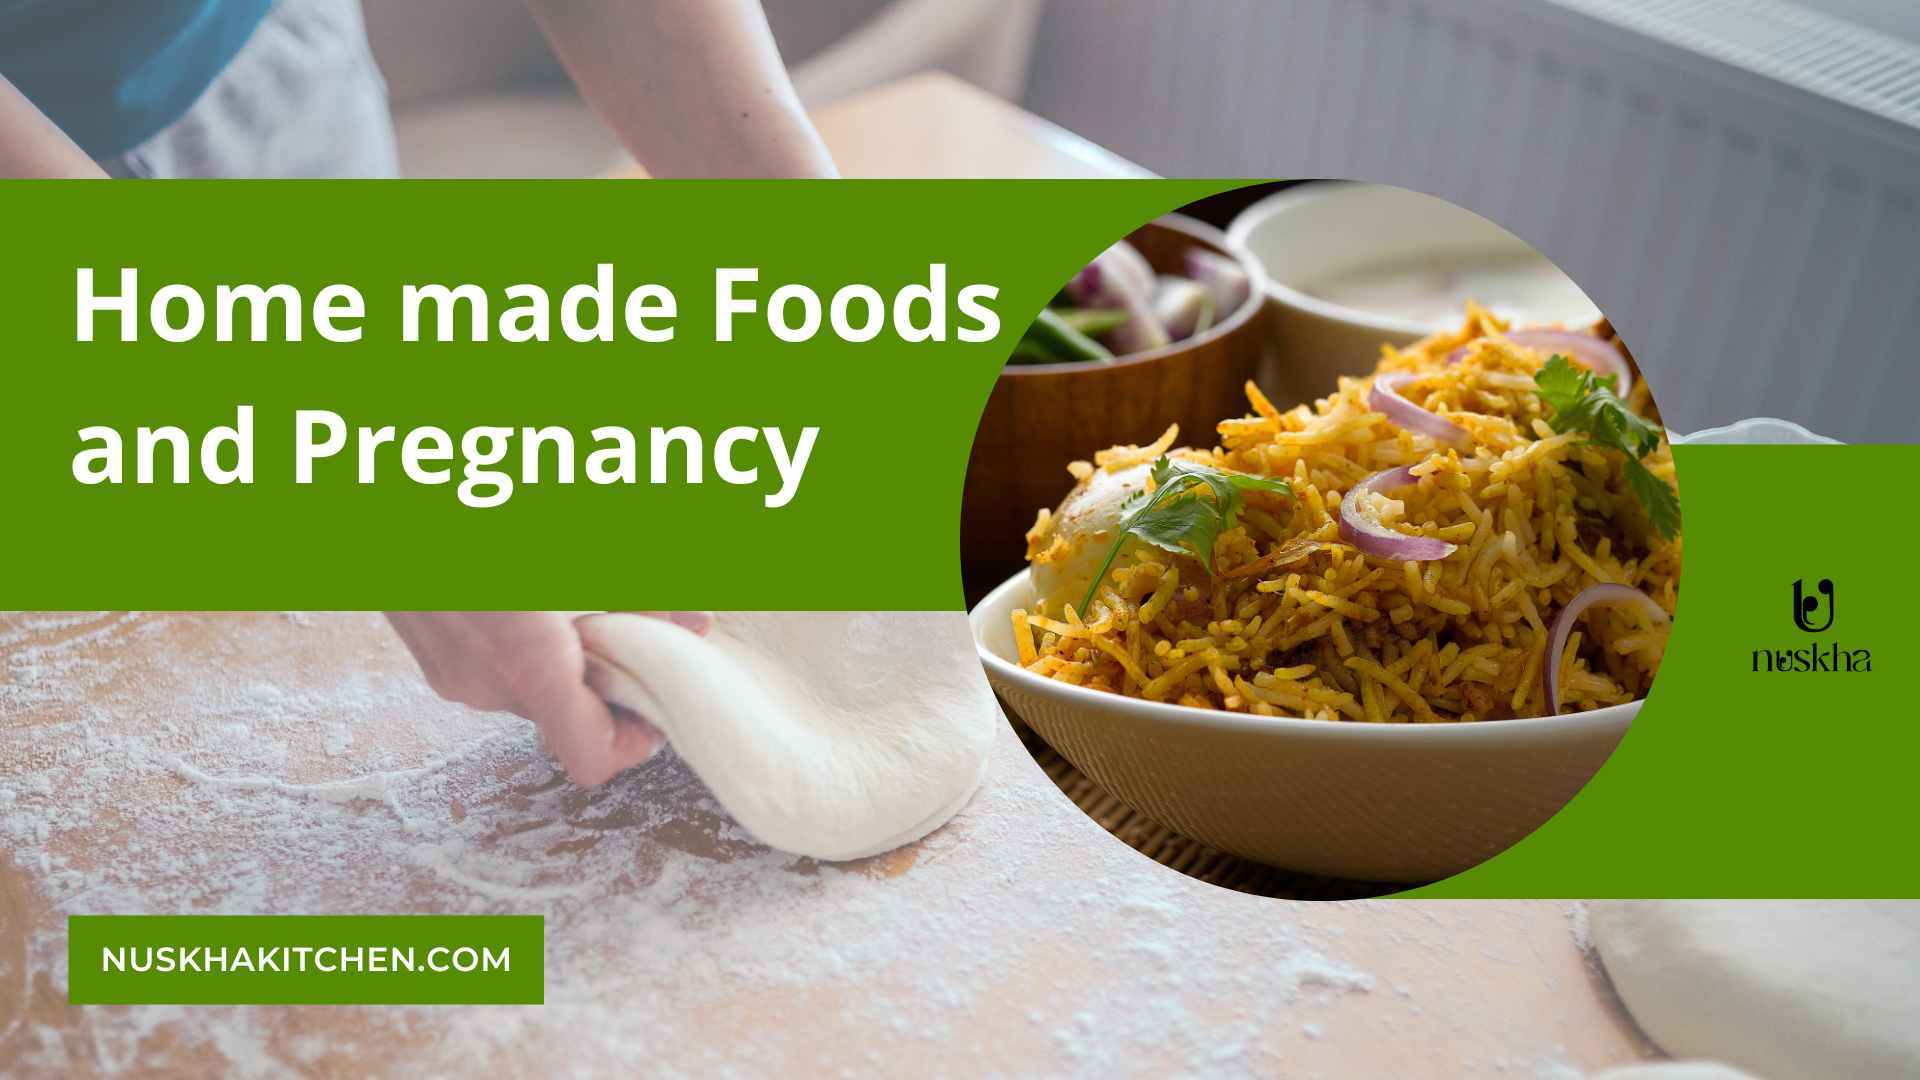 Home made Foods and Pregnancy